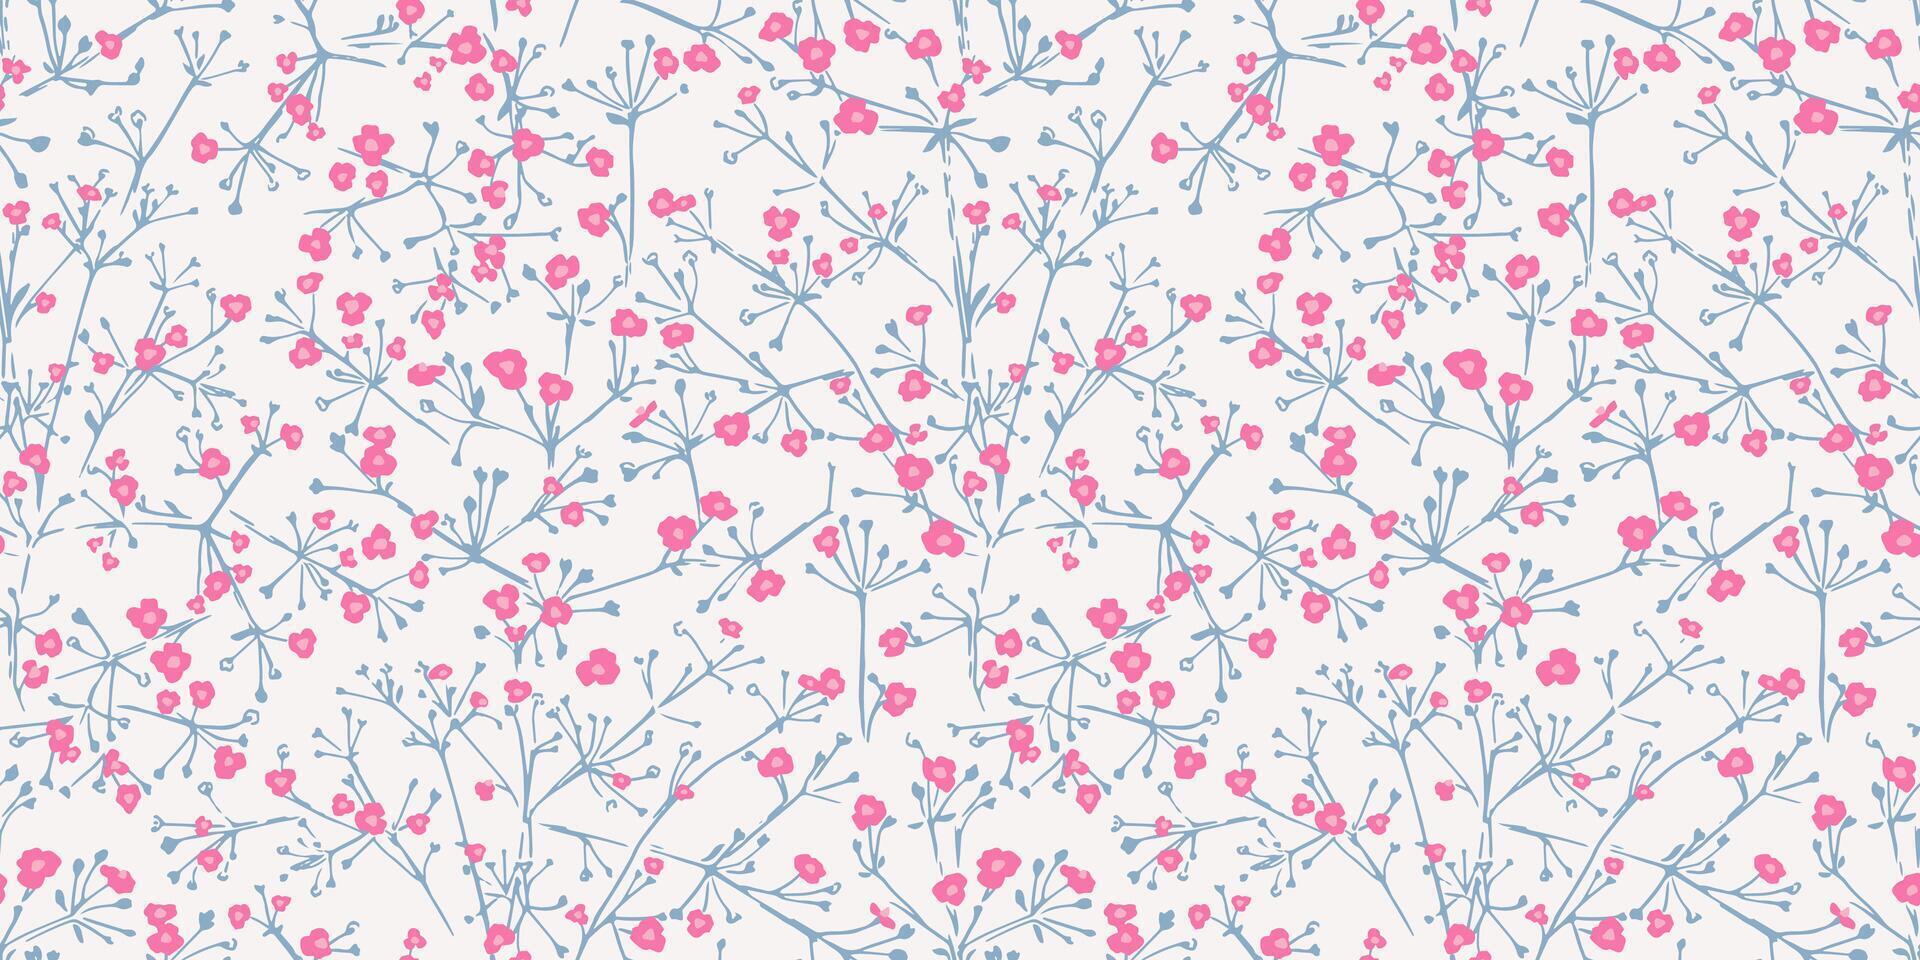 hand drawn sketch small flowers with branches intertwined in a seamless pattern on a light background. Cute tiny floral stems printing. Template for designs, textile, surface design, fabric vector